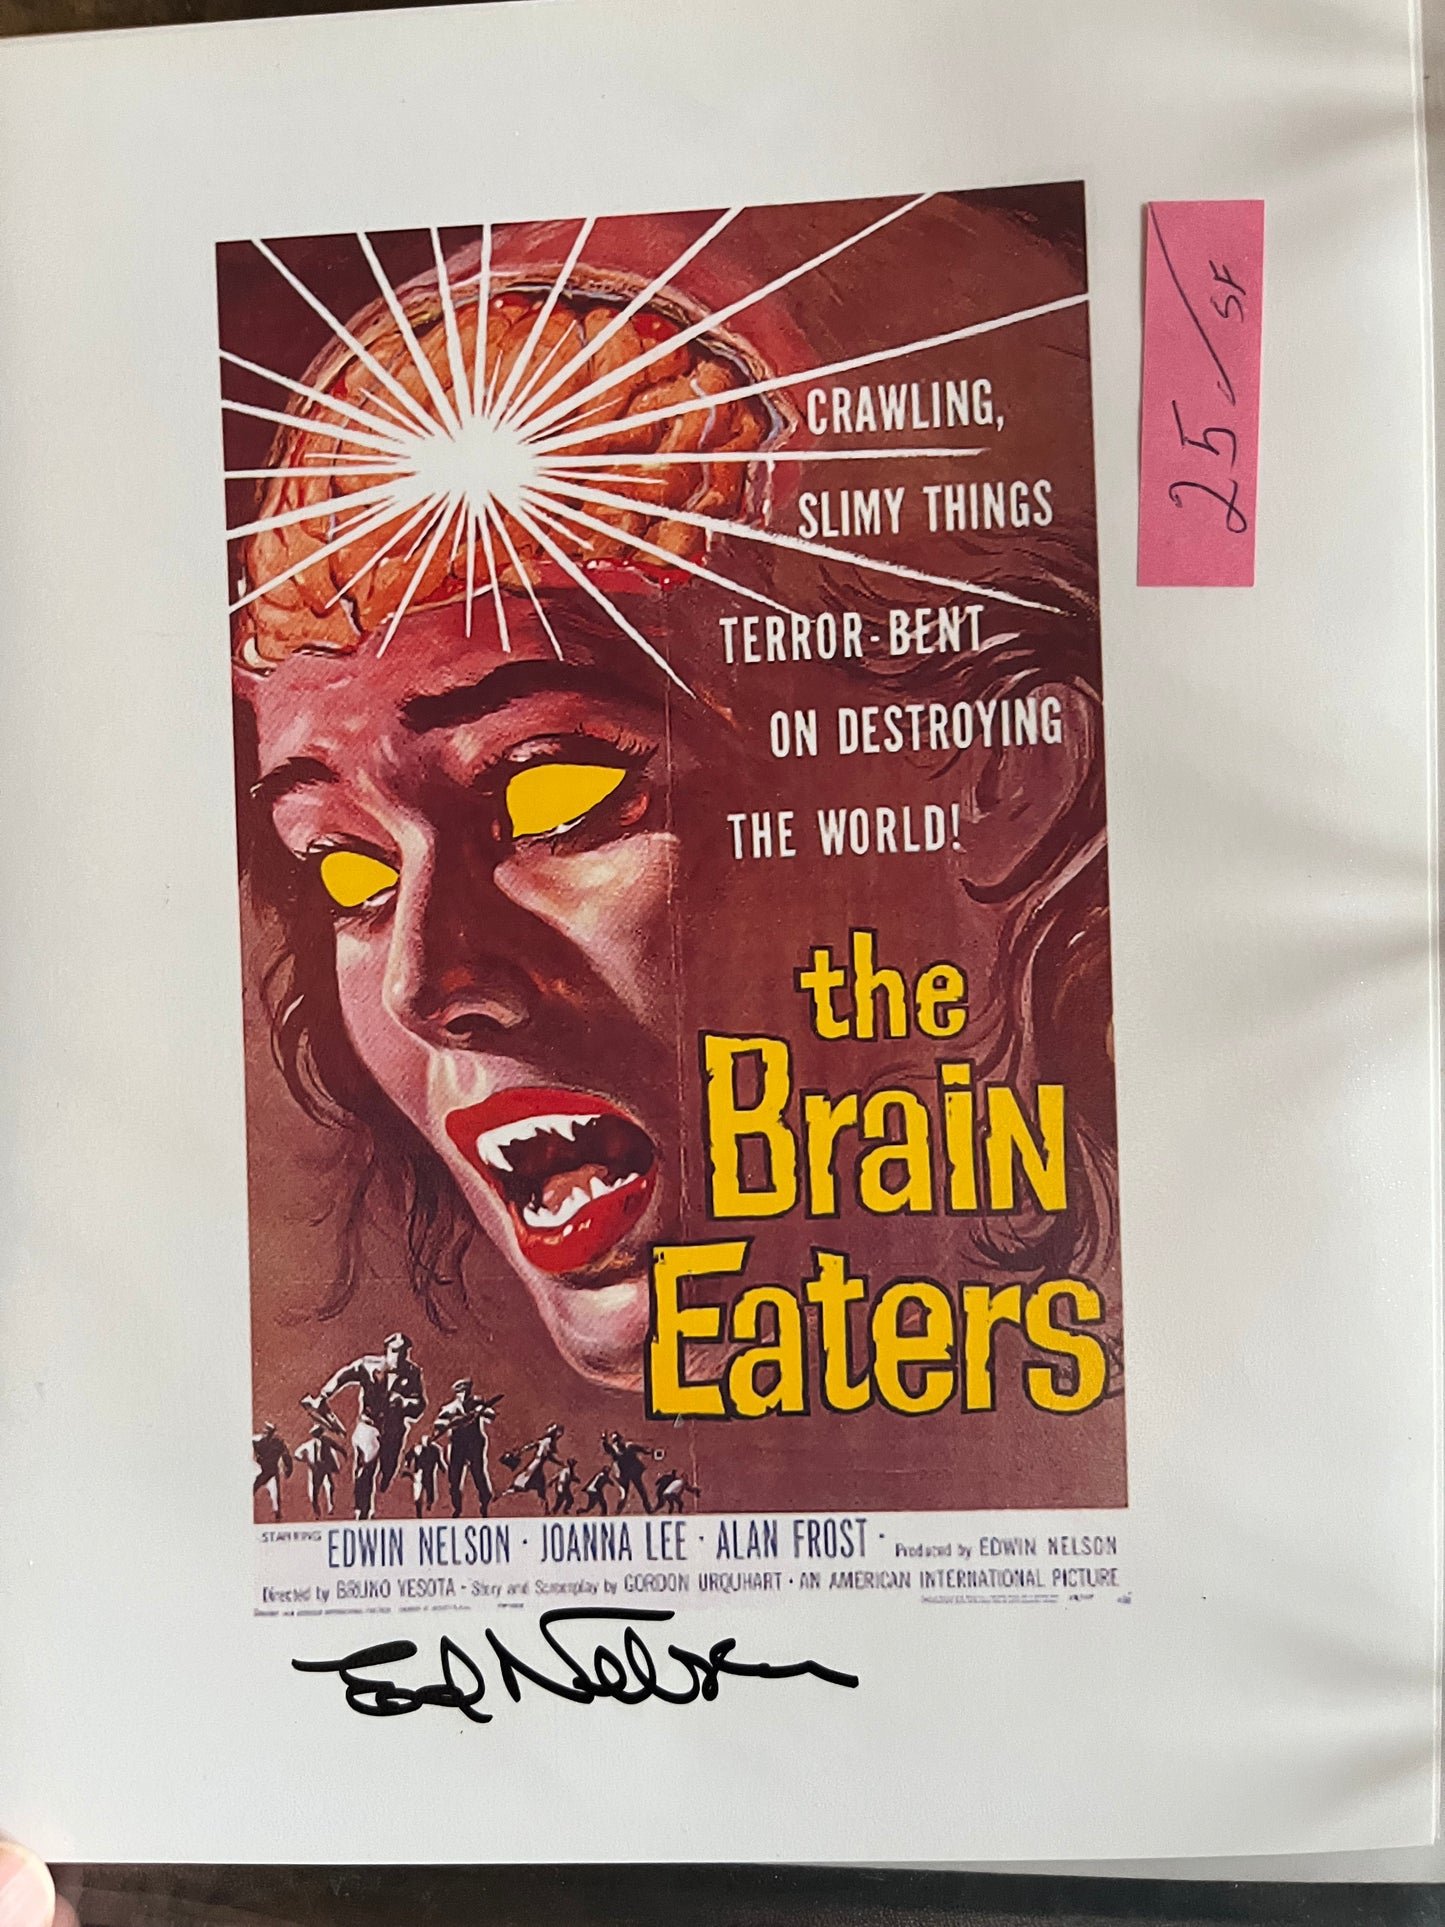 ED NELSON, The Brain Eaters, Roger Corman actor, autograph